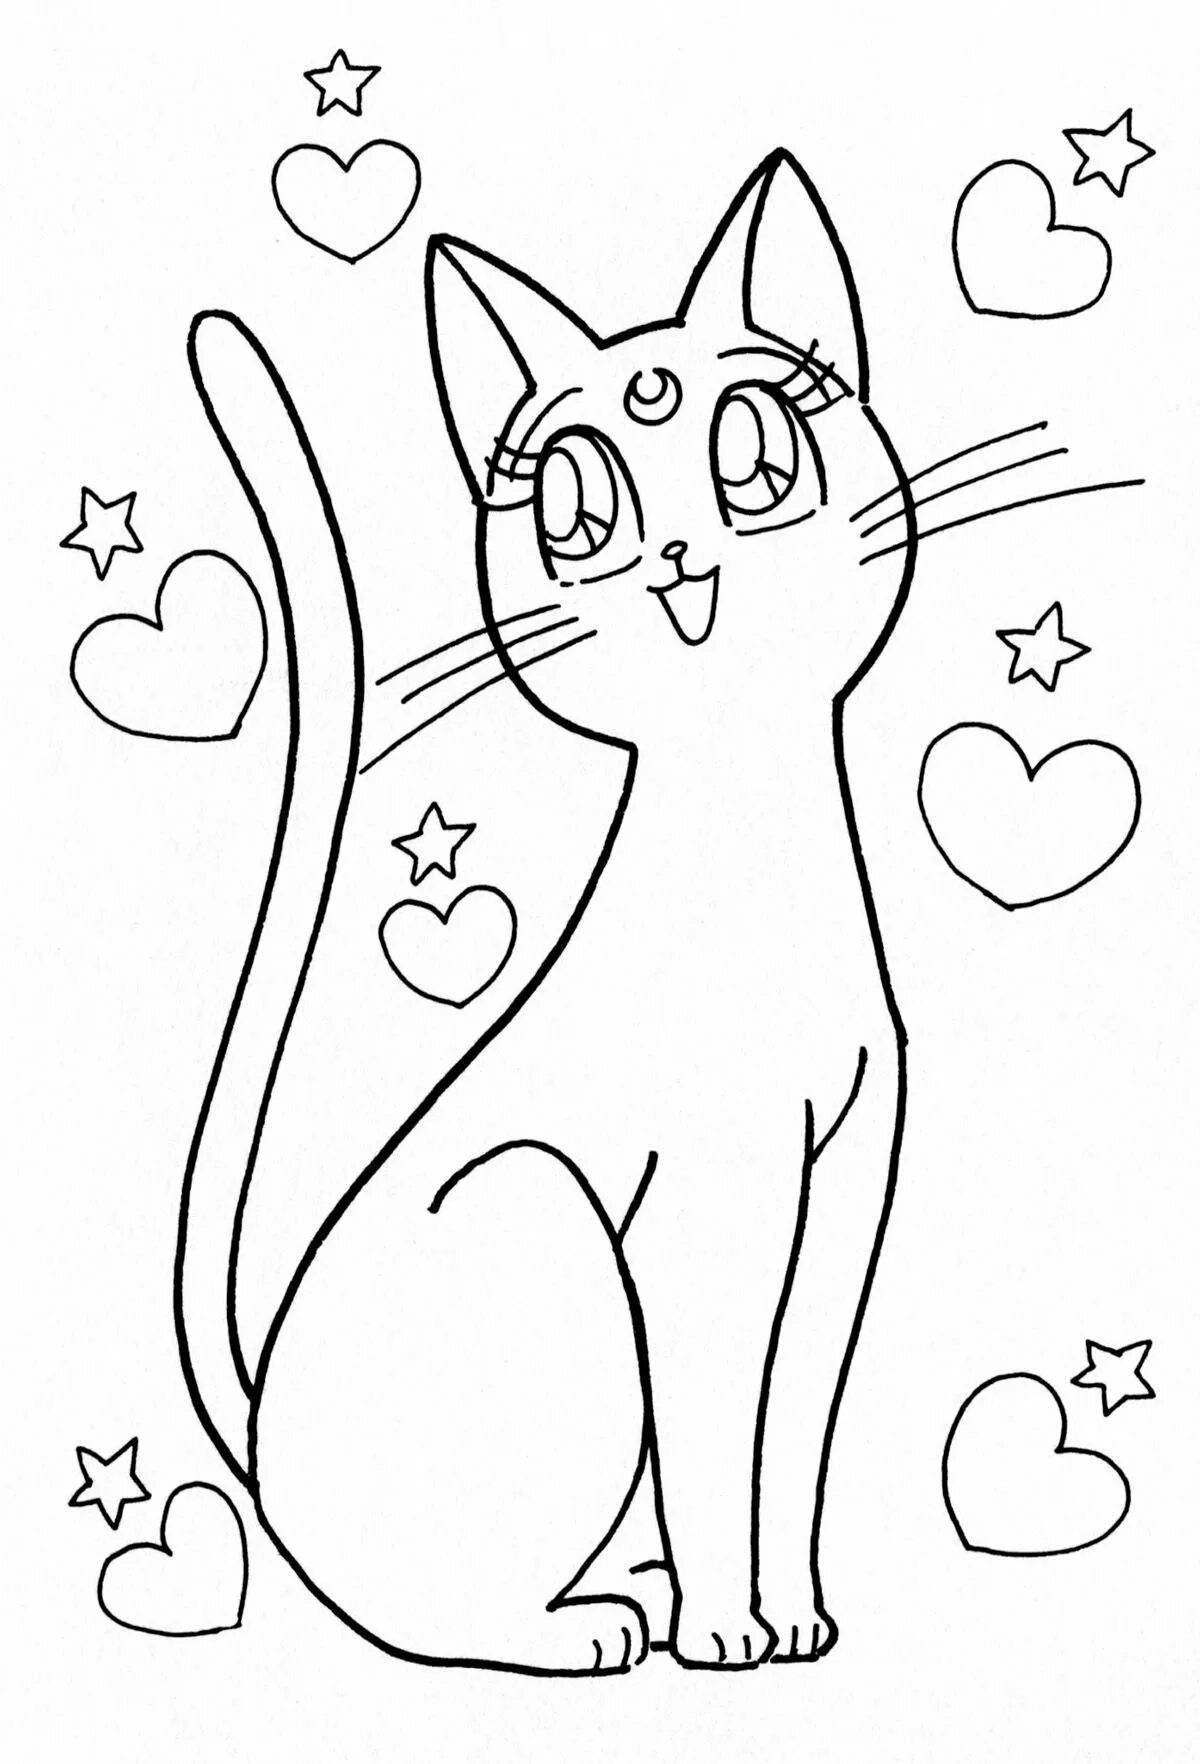 Mystical coloring for girls 12 years old, cute cats